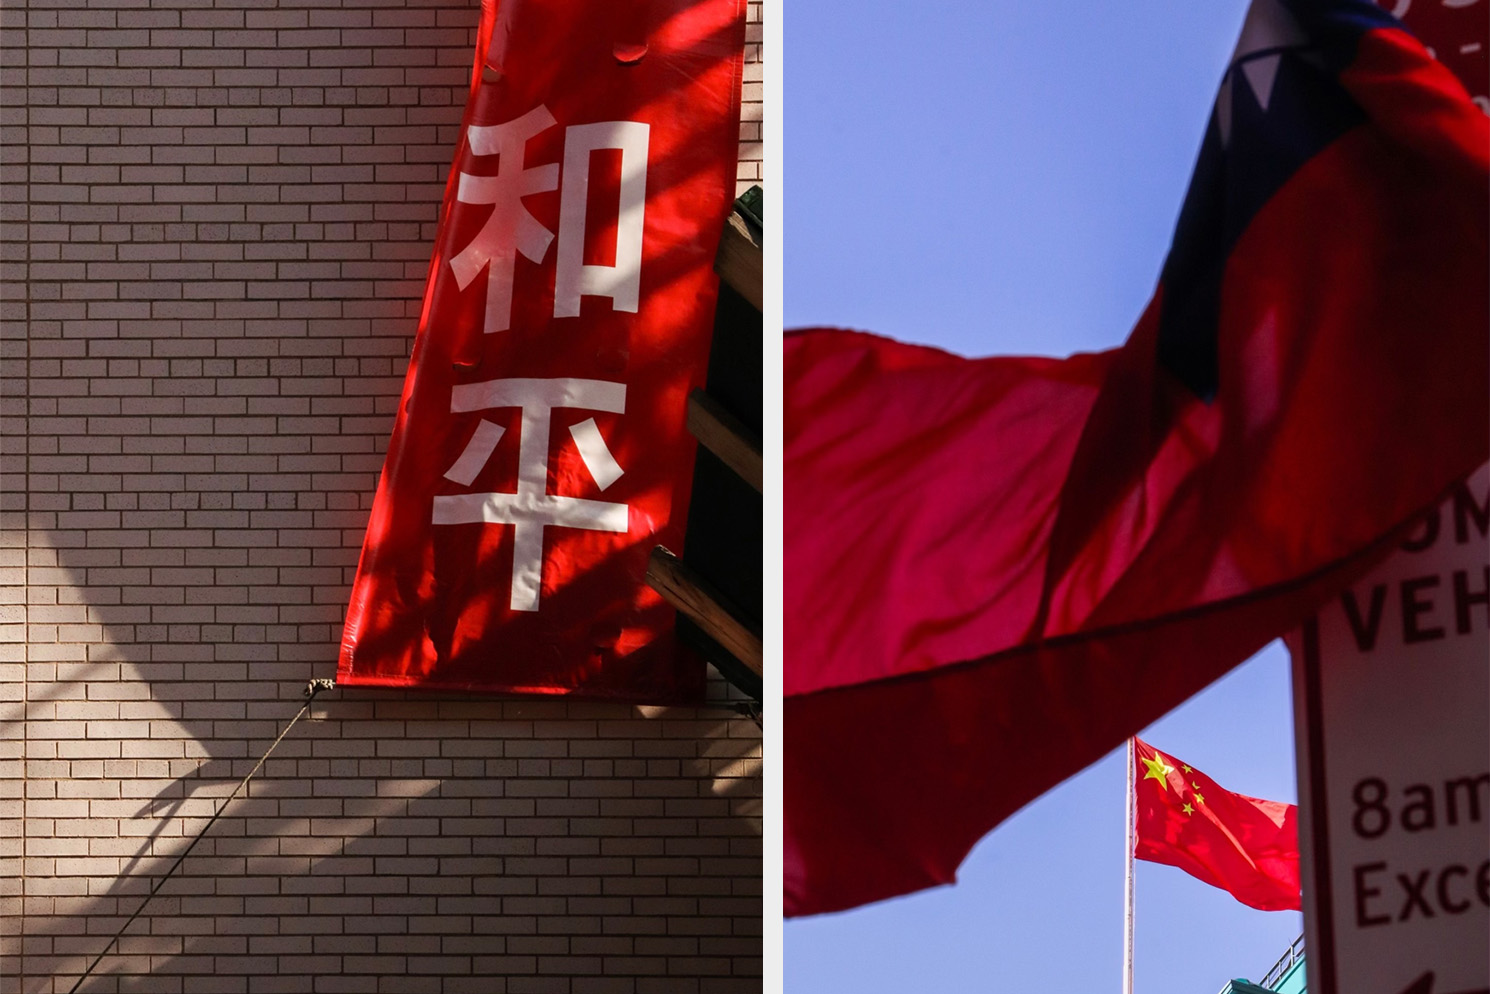 A collage of two photos: a red sign that translates to “peace” on the right; a photo of a Republic of China flag flying in the foreground and a People’s Republic of China flag in the background.